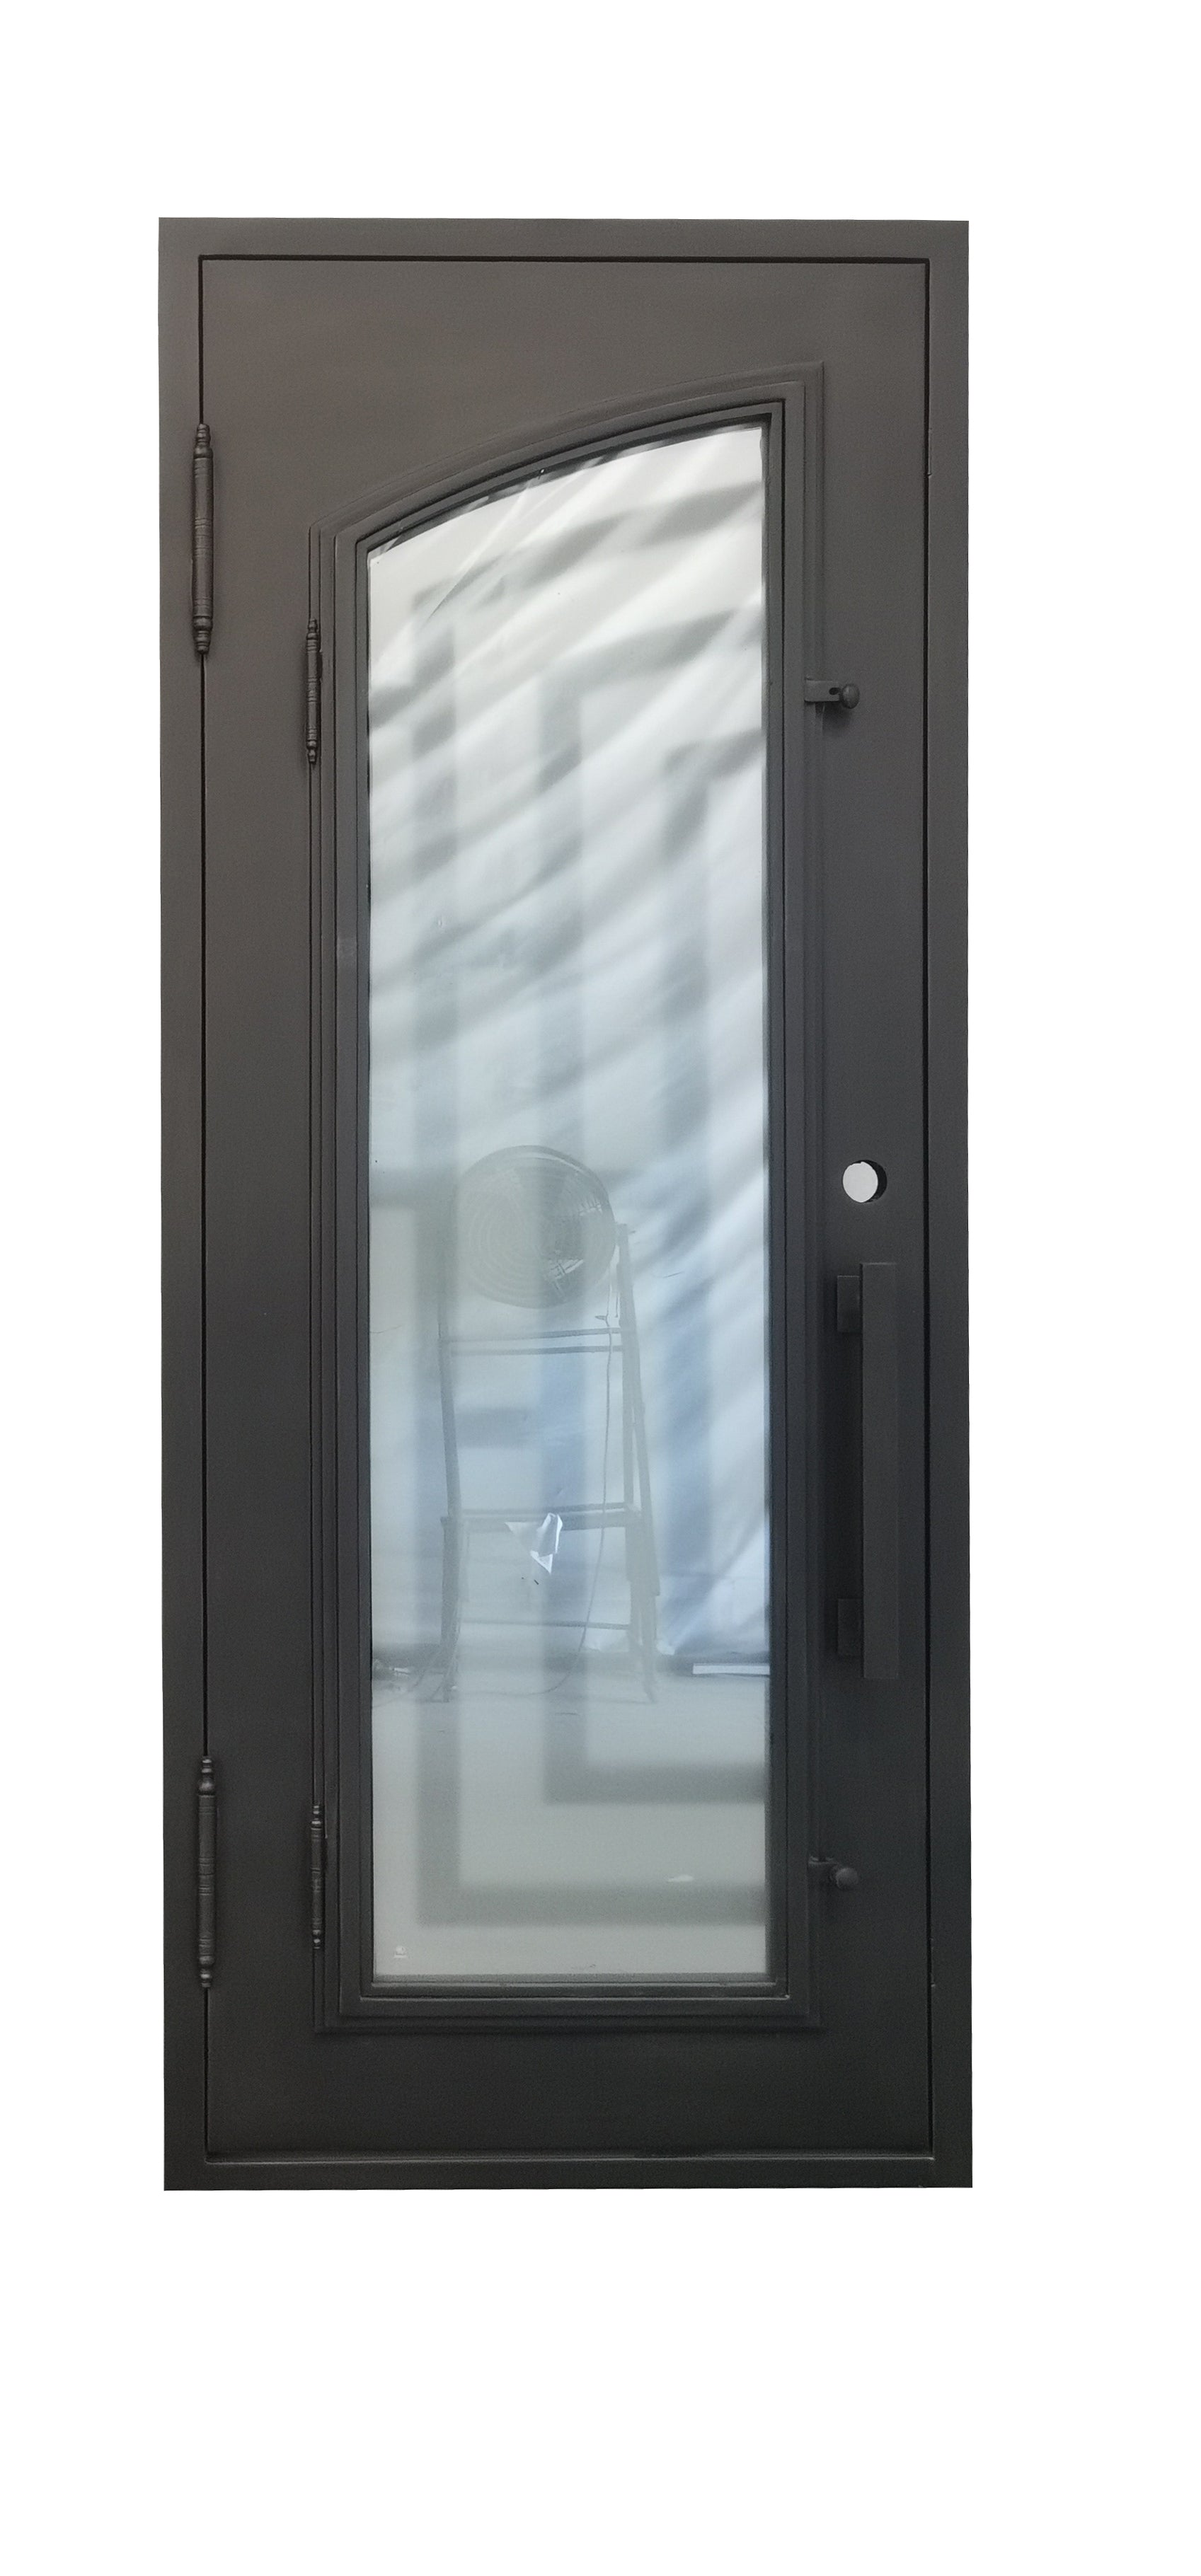 Belton Model Pre Hung Single Front Entry Wrought Iron Door With Frosted Glass Dark Bronze Finish